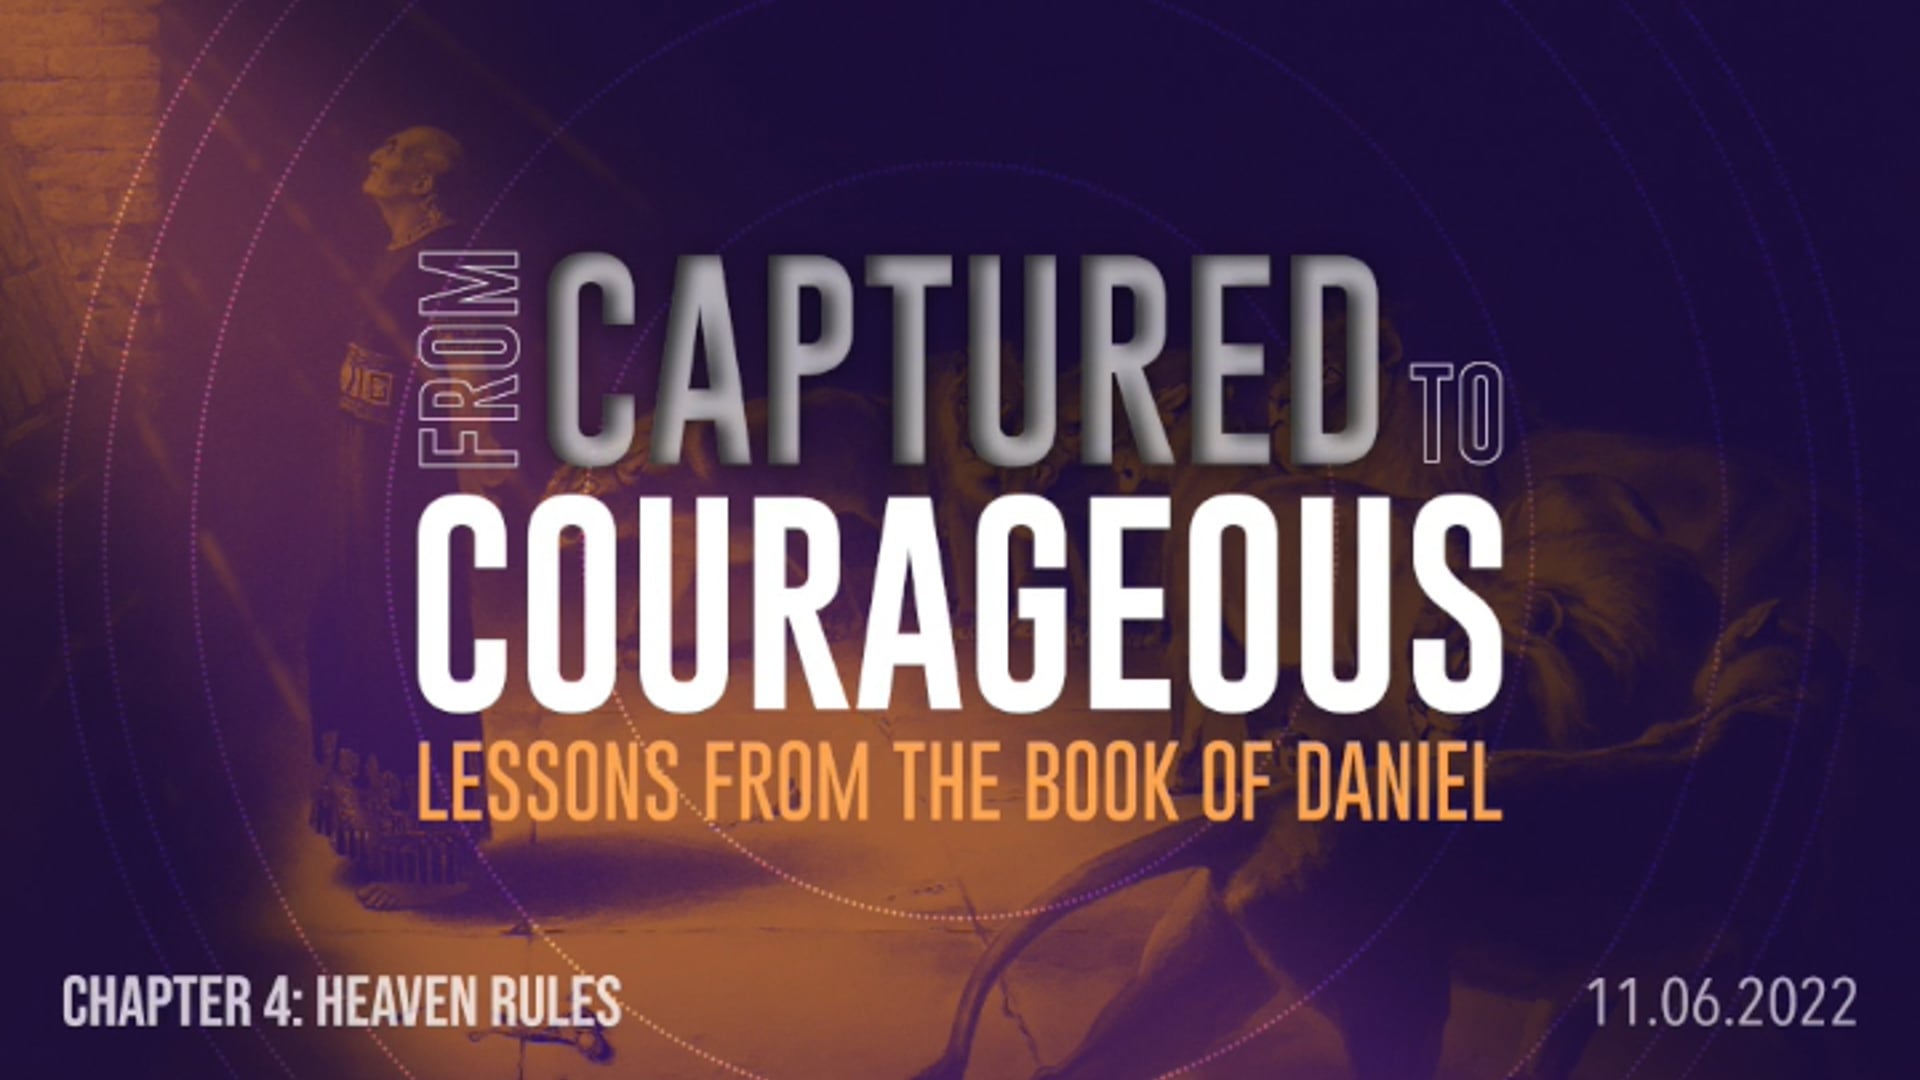 From Captured to Courageous - Part 4: Heaven Rules